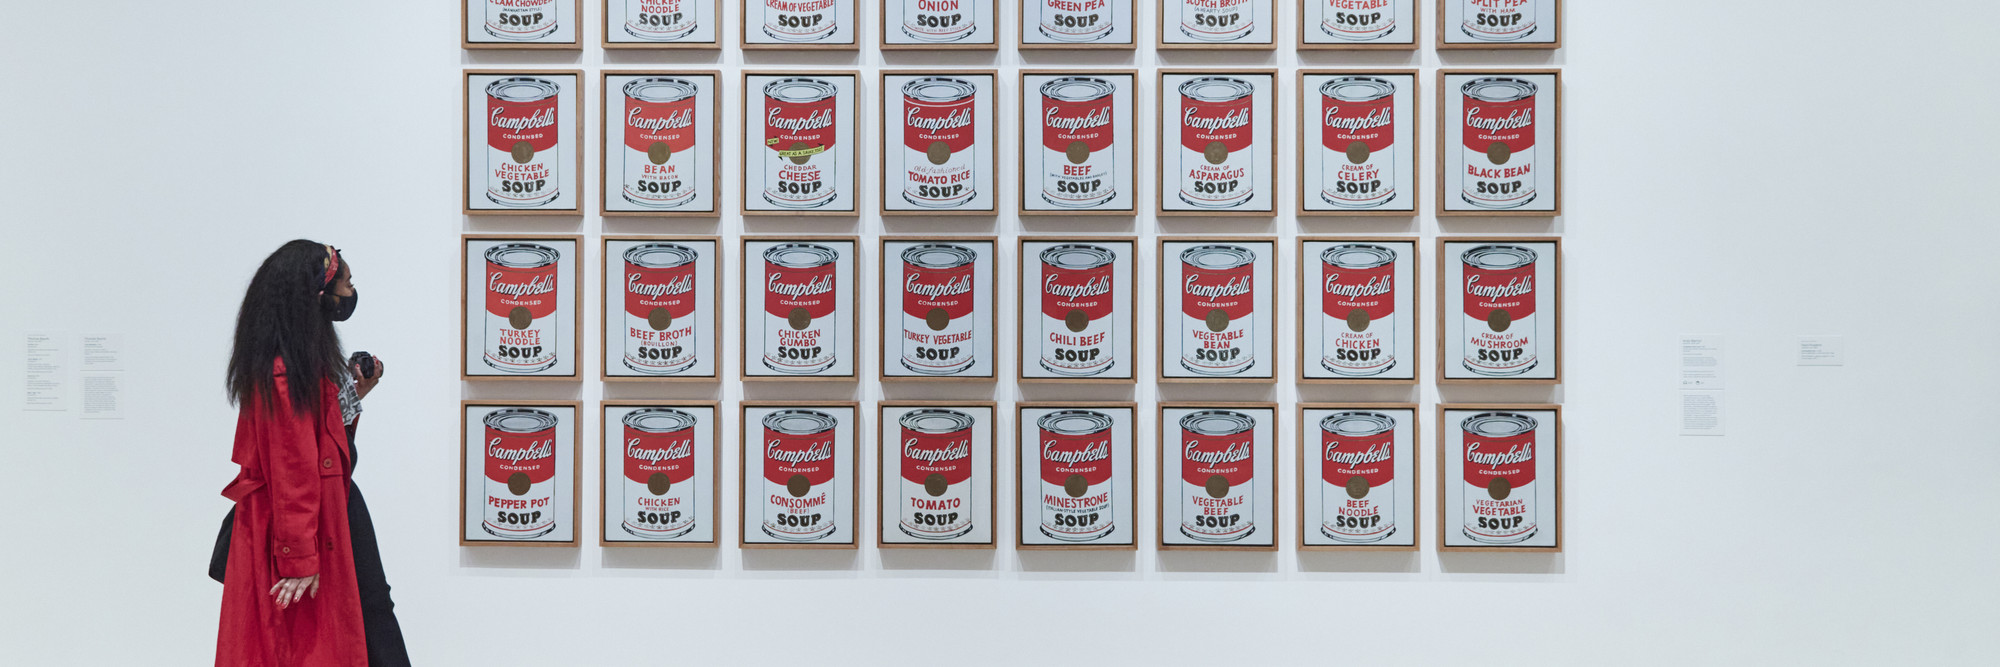 Andy Warhol. Campbell’s Soup Cans. 1962. Acrylic with metallic enamel paint on canvas, 32 panels. The Museum of Modern Art, New York. Partial gift of Irving Blum Additional funding provided by Nelson A. Rockefeller Bequest, gift of Mr. and Mrs. William A. M. Burden, Abby Aldrich Rockefeller Fund, gift of Nina and Gordon Bunshaft, acquired through the Lillie P. Bliss Bequest, Philip Johnson Fund, Frances R. Keech Bequest, gift of Mrs. Bliss Parkinson, and Florence B. Wesley Bequest (all by exchange). © 2022 Andy Warhol Foundation/ARS, NY/TM. Licensed by Campbell&#39;s Soup Co. All rights reserved. Photo: Gus Powell